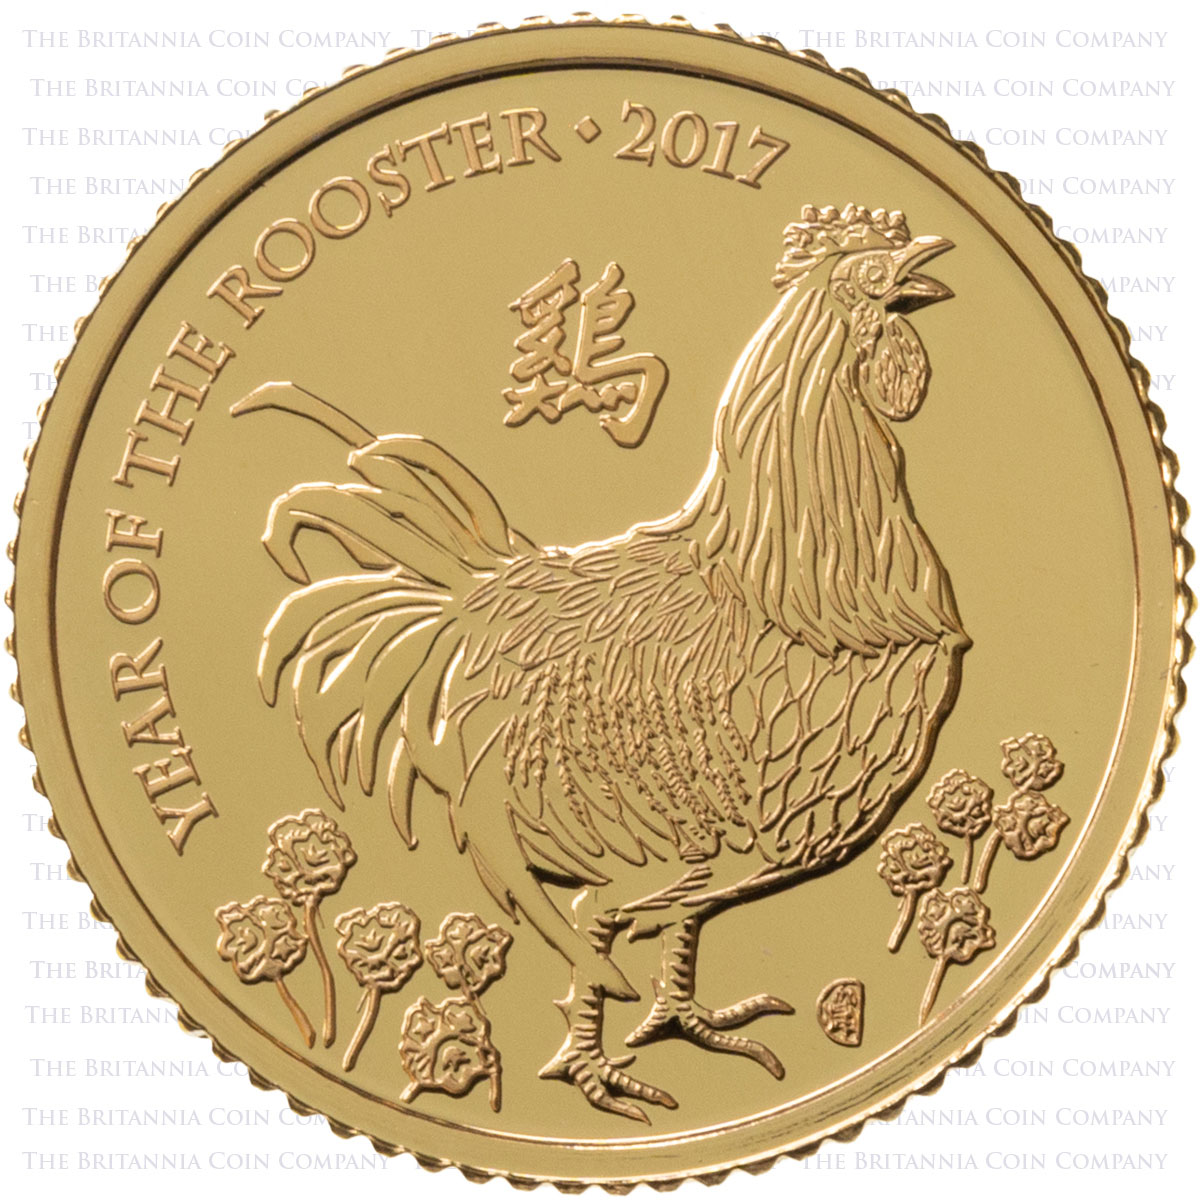 UKR17GT 2017 Lunar Year Of The Rooster Tenth Ounce Gold Brilliant Uncirculated Coin Reverse